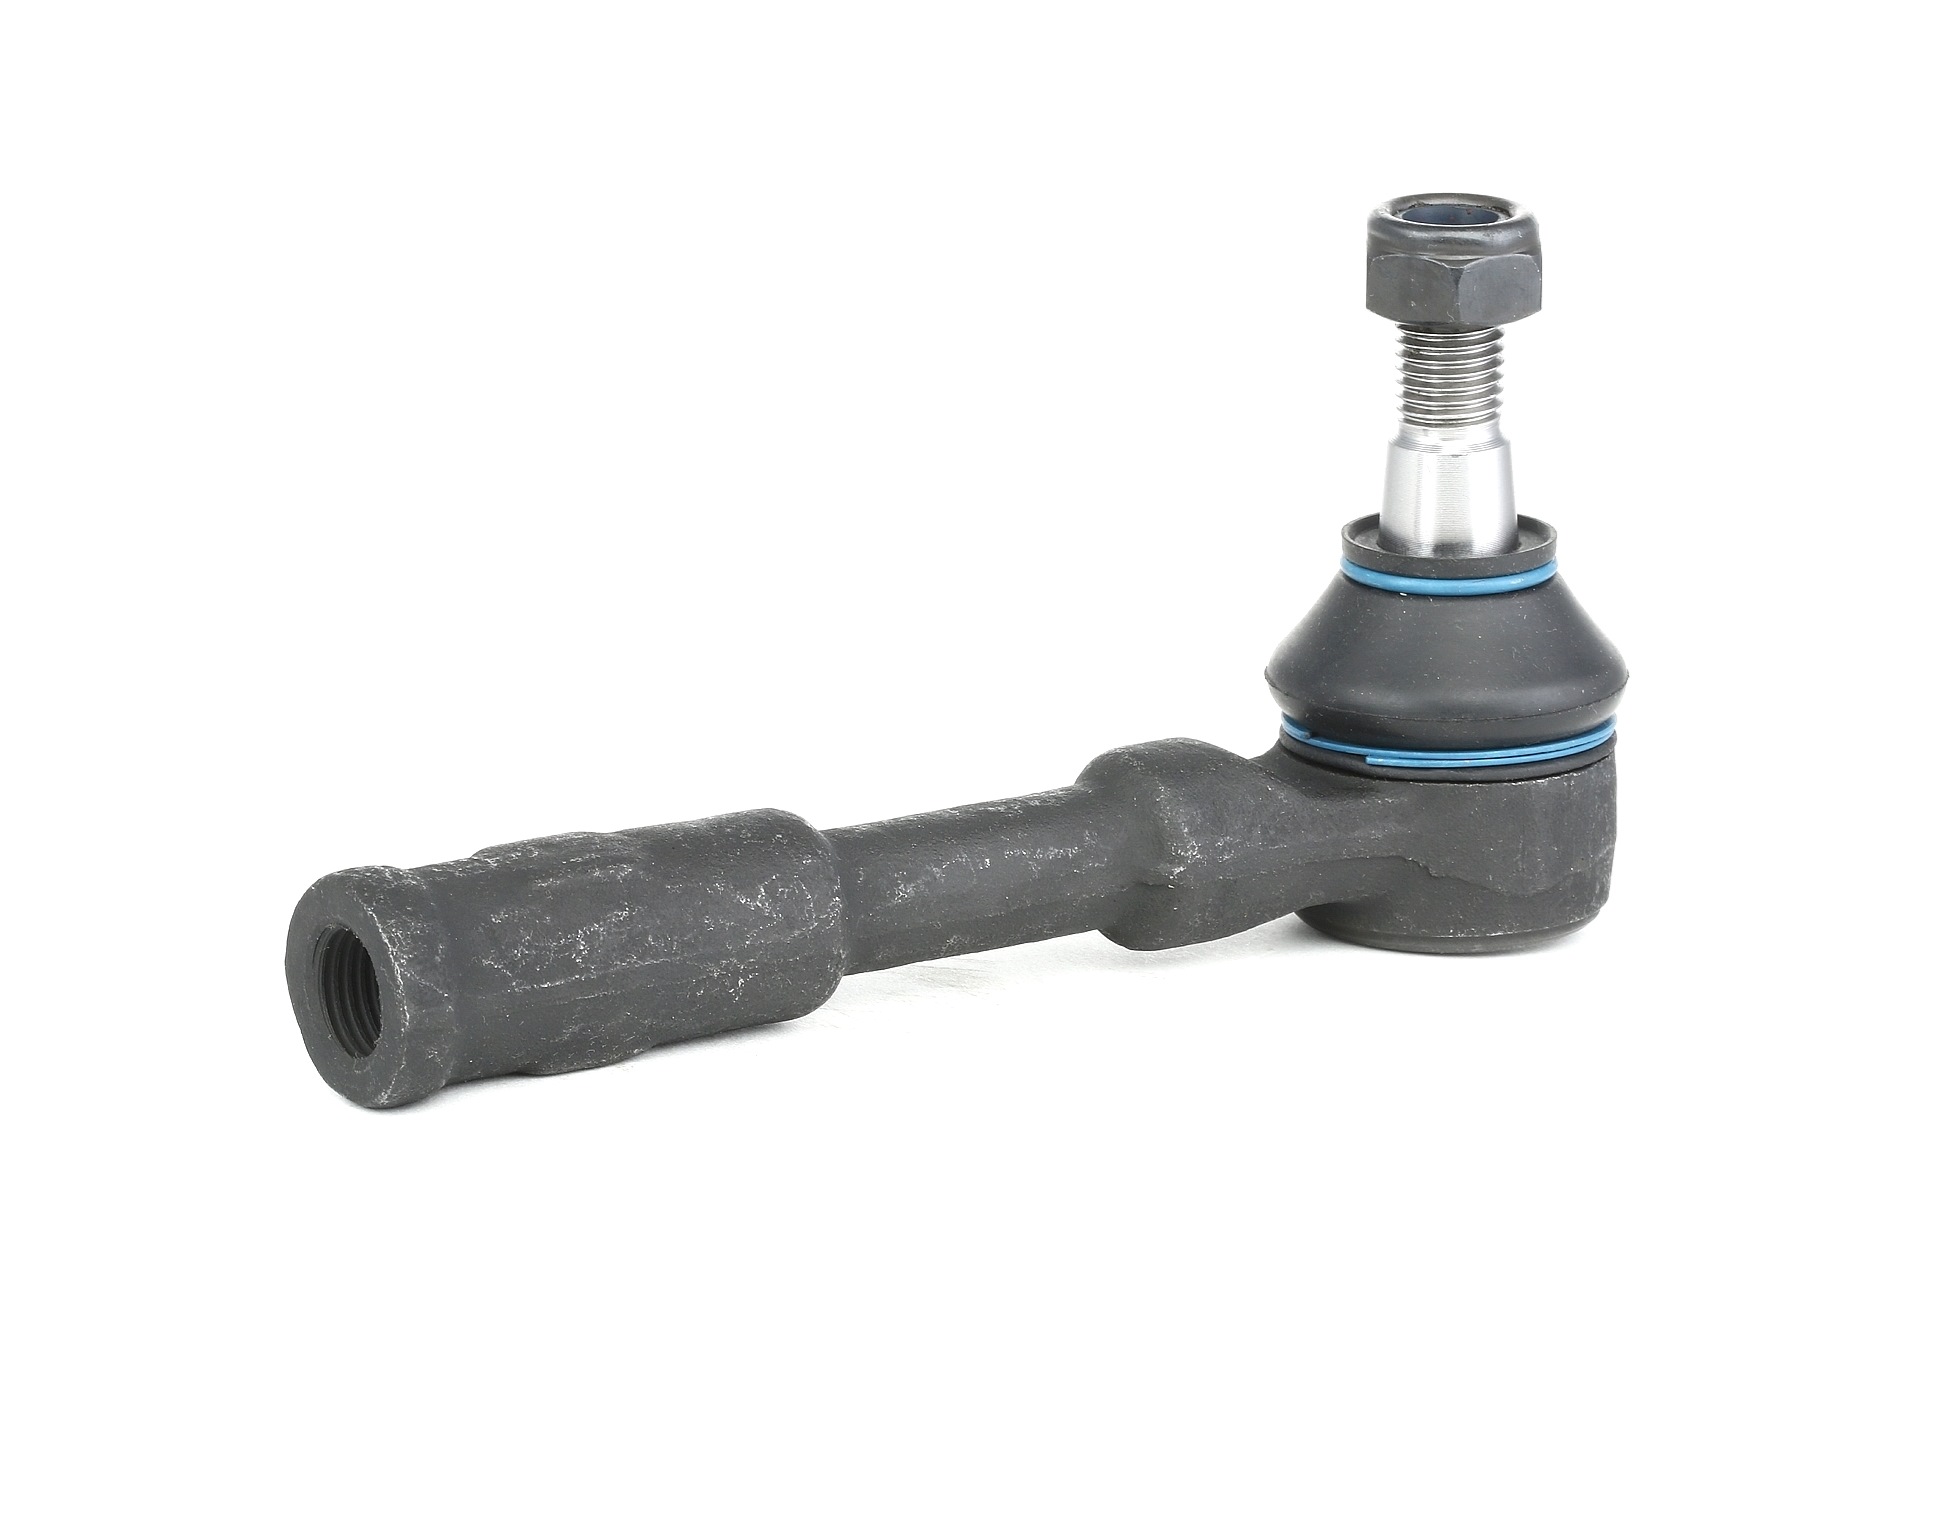 STARK SKTE-0280006 Track rod end Cone Size 13,30 mm, M12X1.5, Front Axle, both sides, outer